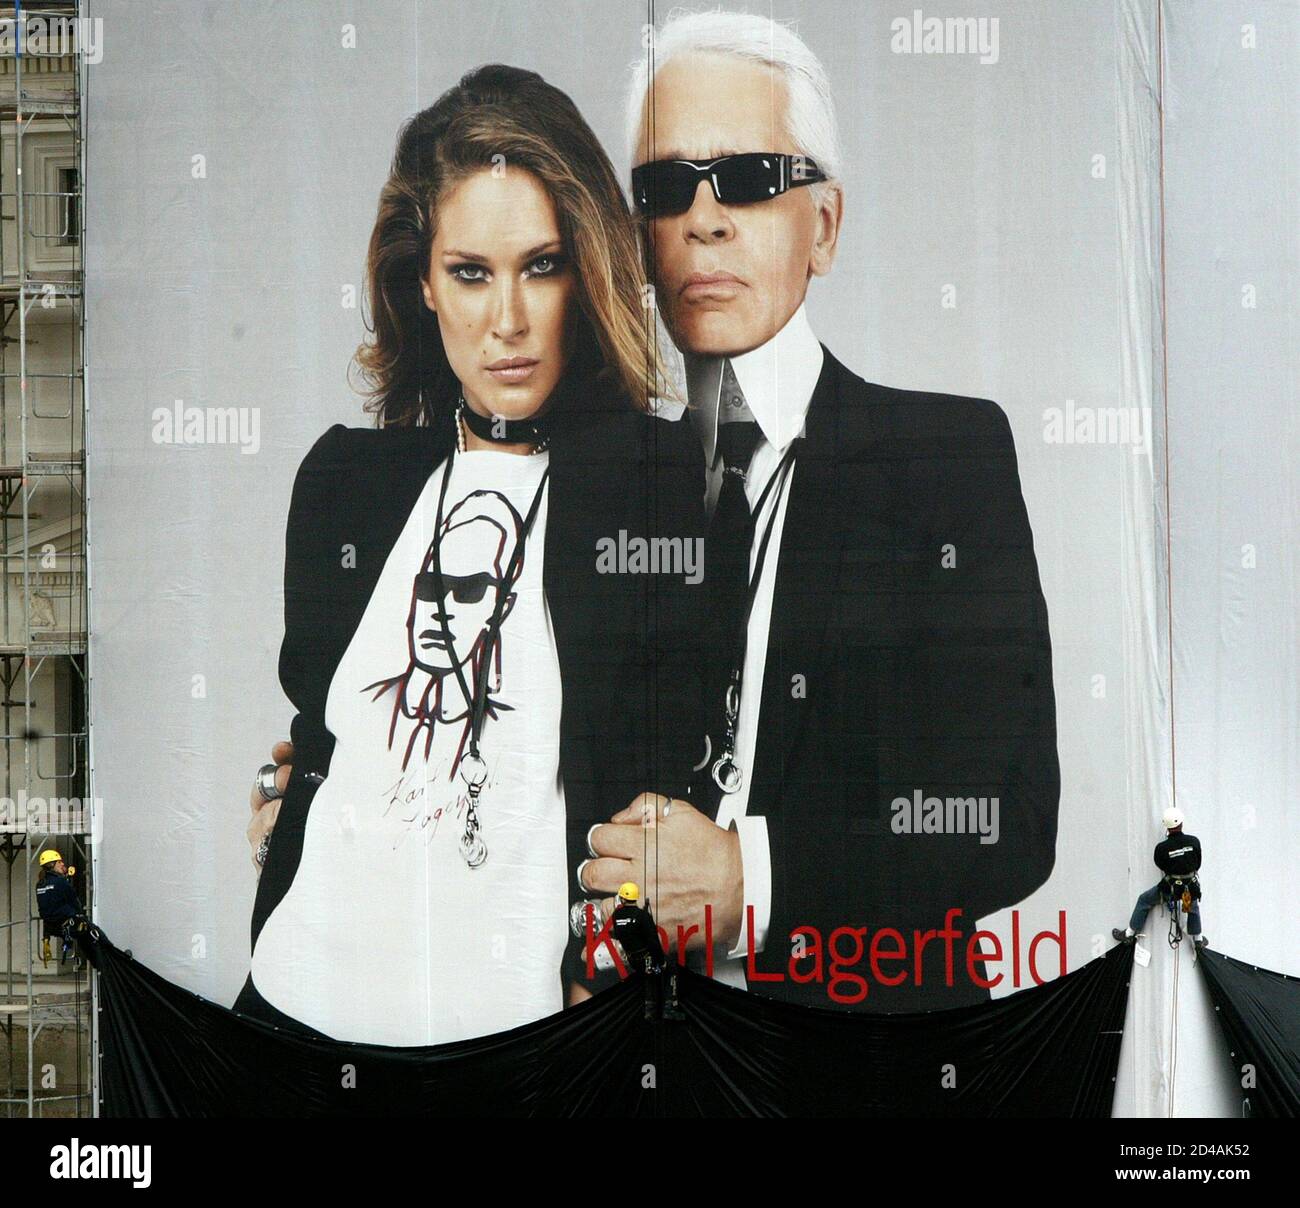 H And M Karl Lagerfeld | ccelrecreo.com